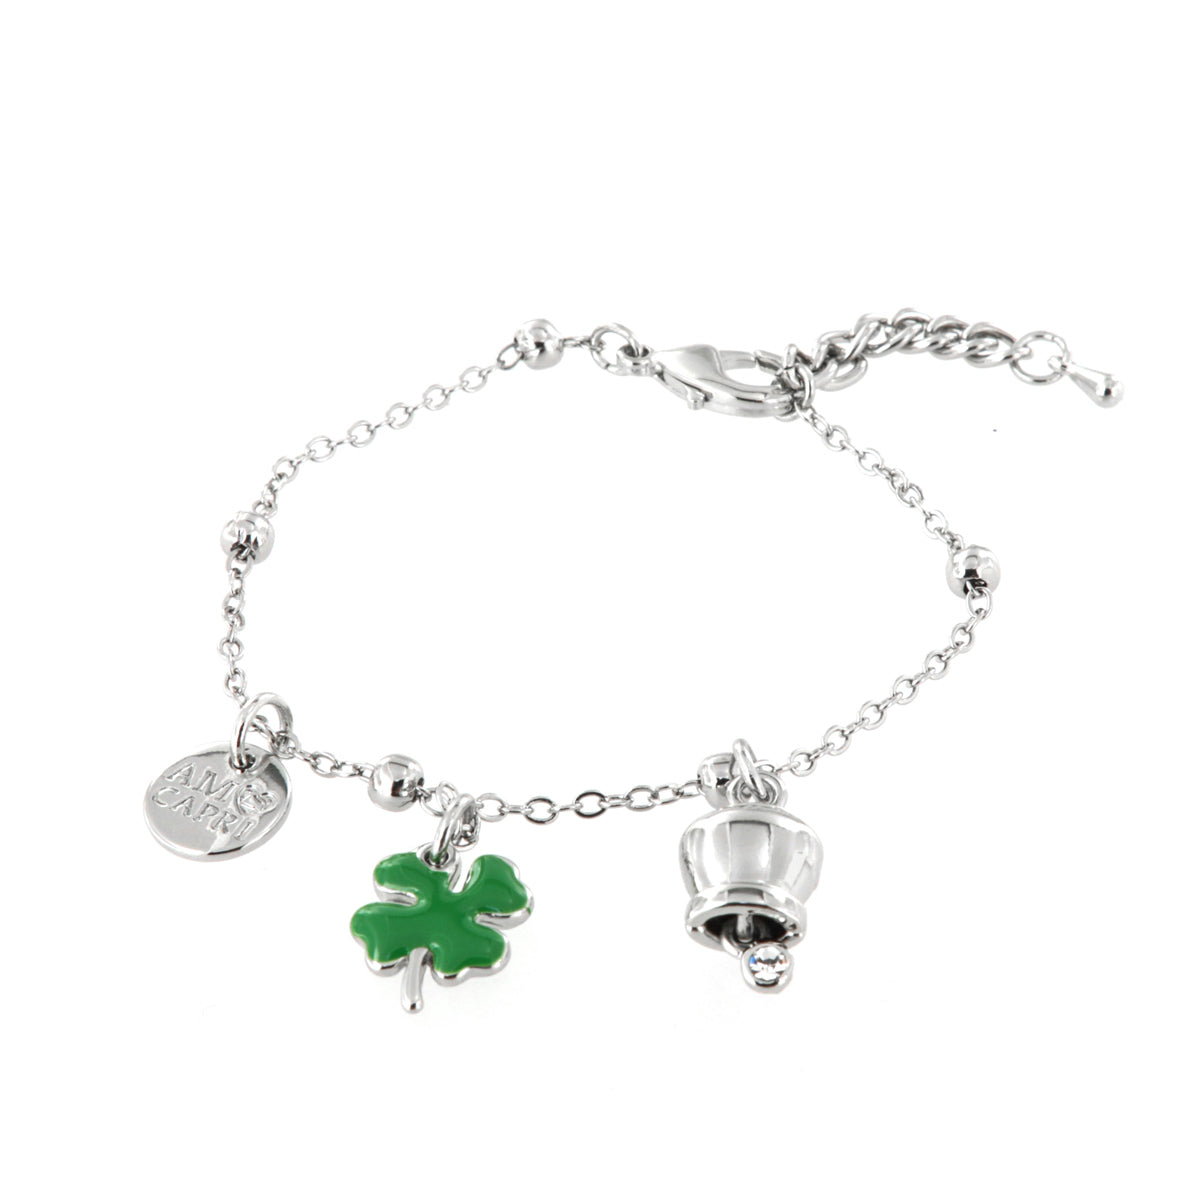 Metal bracelet with bell and four -leaf clover in green enamel